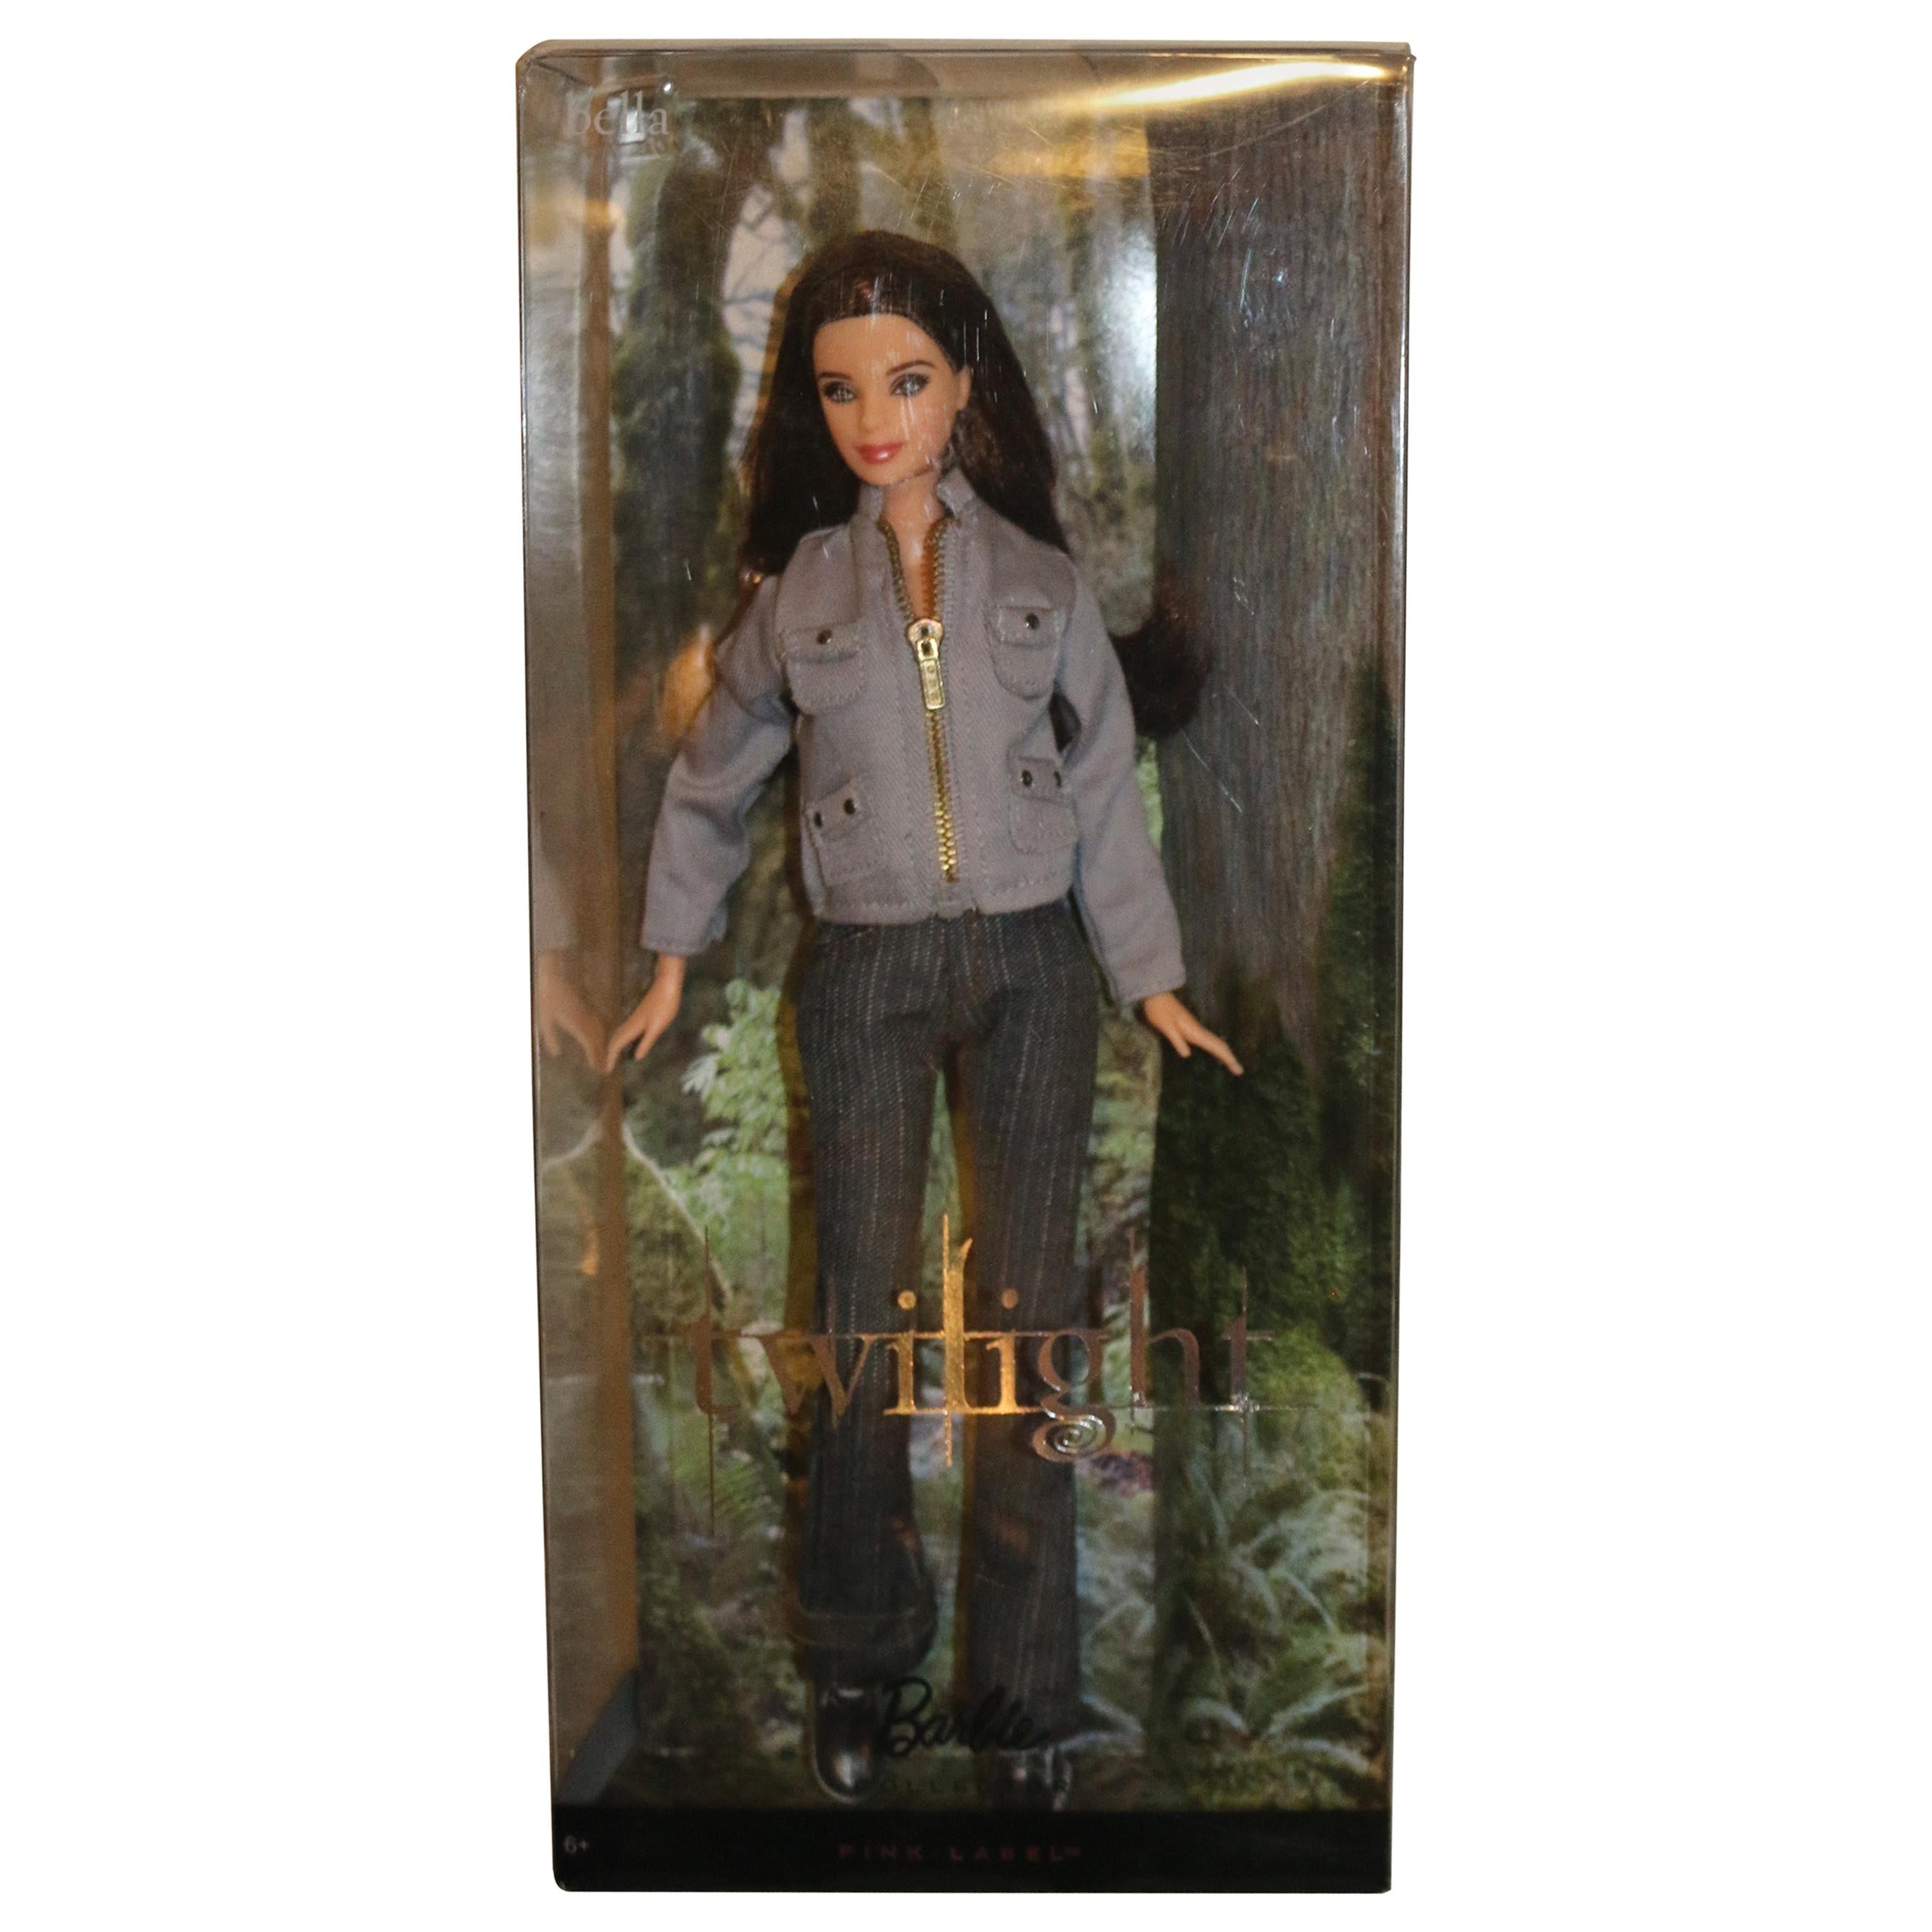 Twilight Saga Barbie Collection Bella Doll Pink Label New in Sealed Box Package For Sale